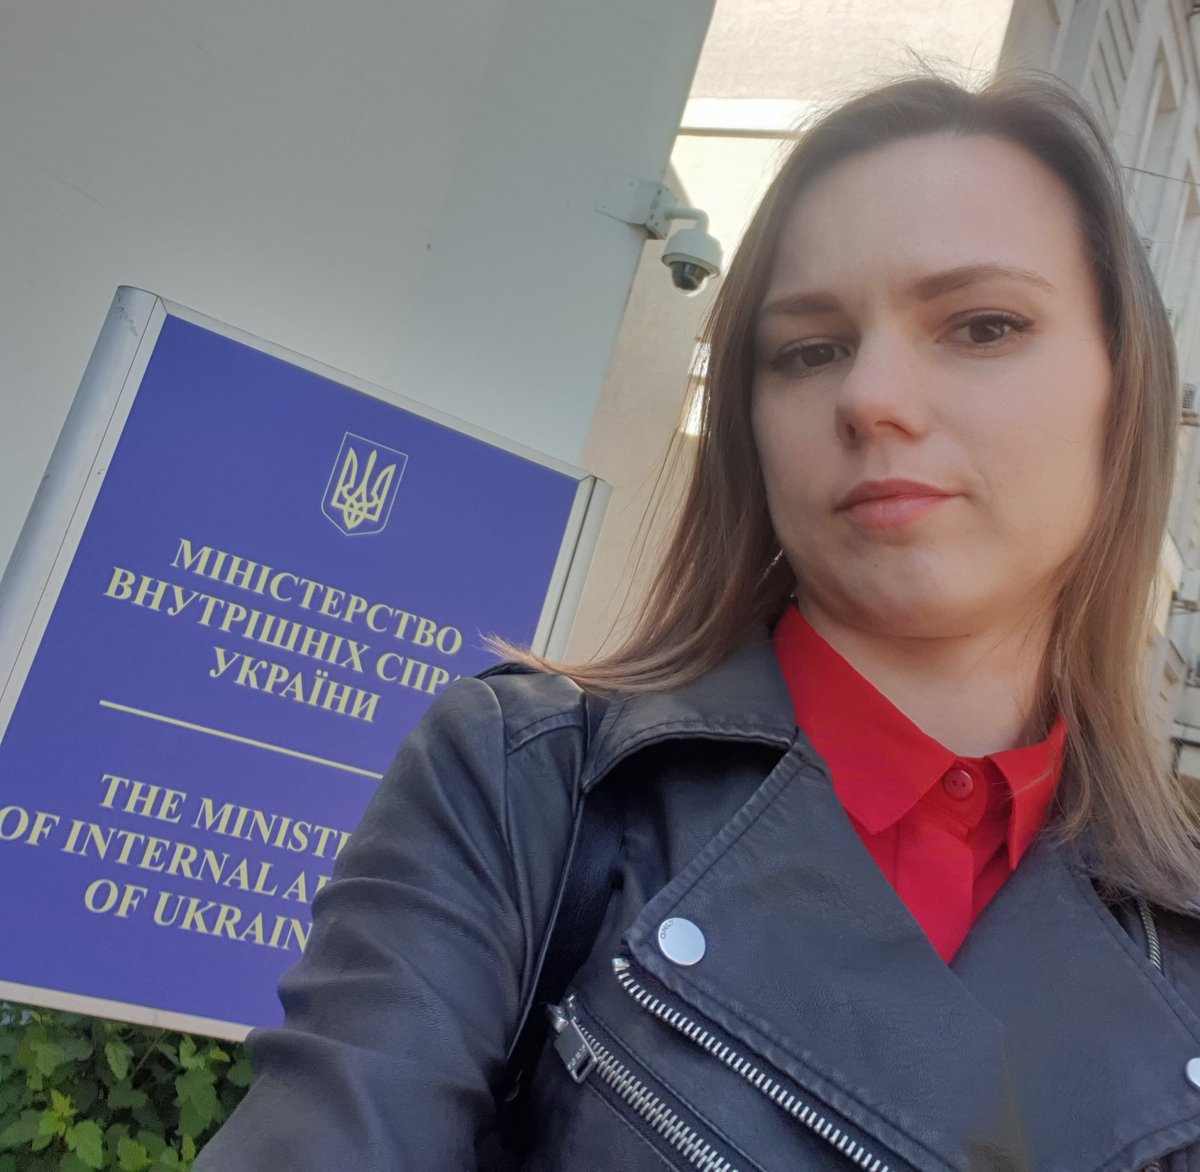 I hope I'm the first and the last Ukrainian journalist who will be interrogated only for sending info request to MP. Thank you great people around the world for your support!